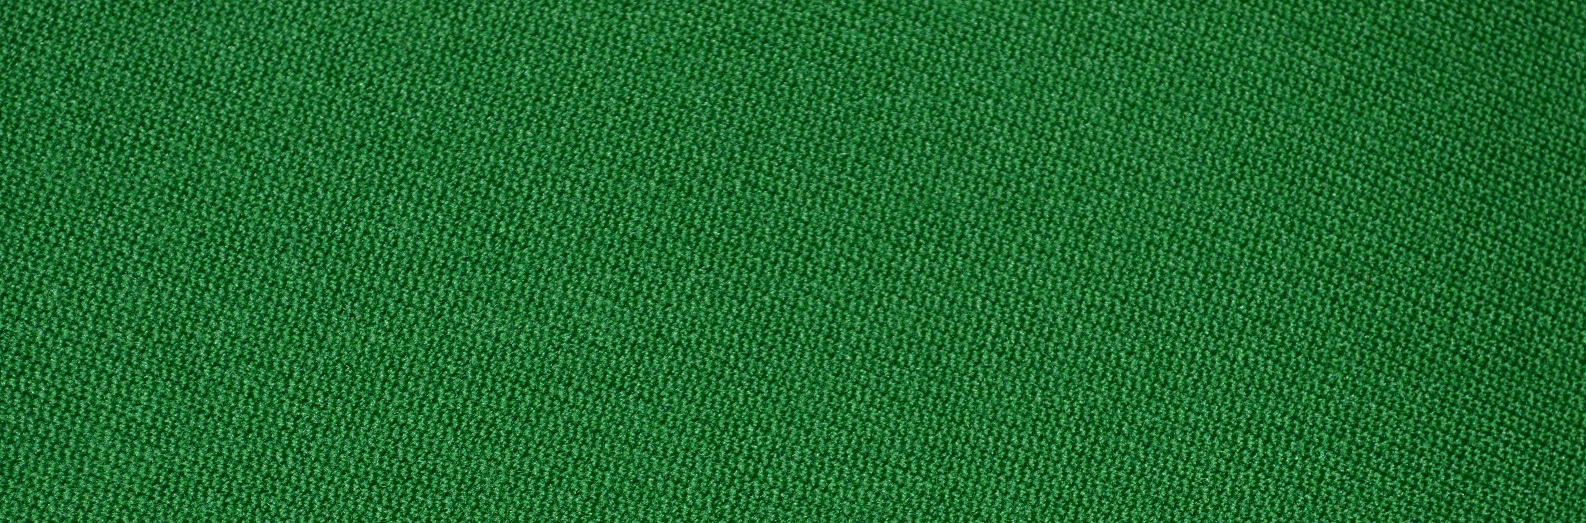 Close Up Dark Green Snooker Table Felt Soft Rough Textile Material  Background With Shade Vignette Stock Photo Image Of Fiber, Macro: 197616228